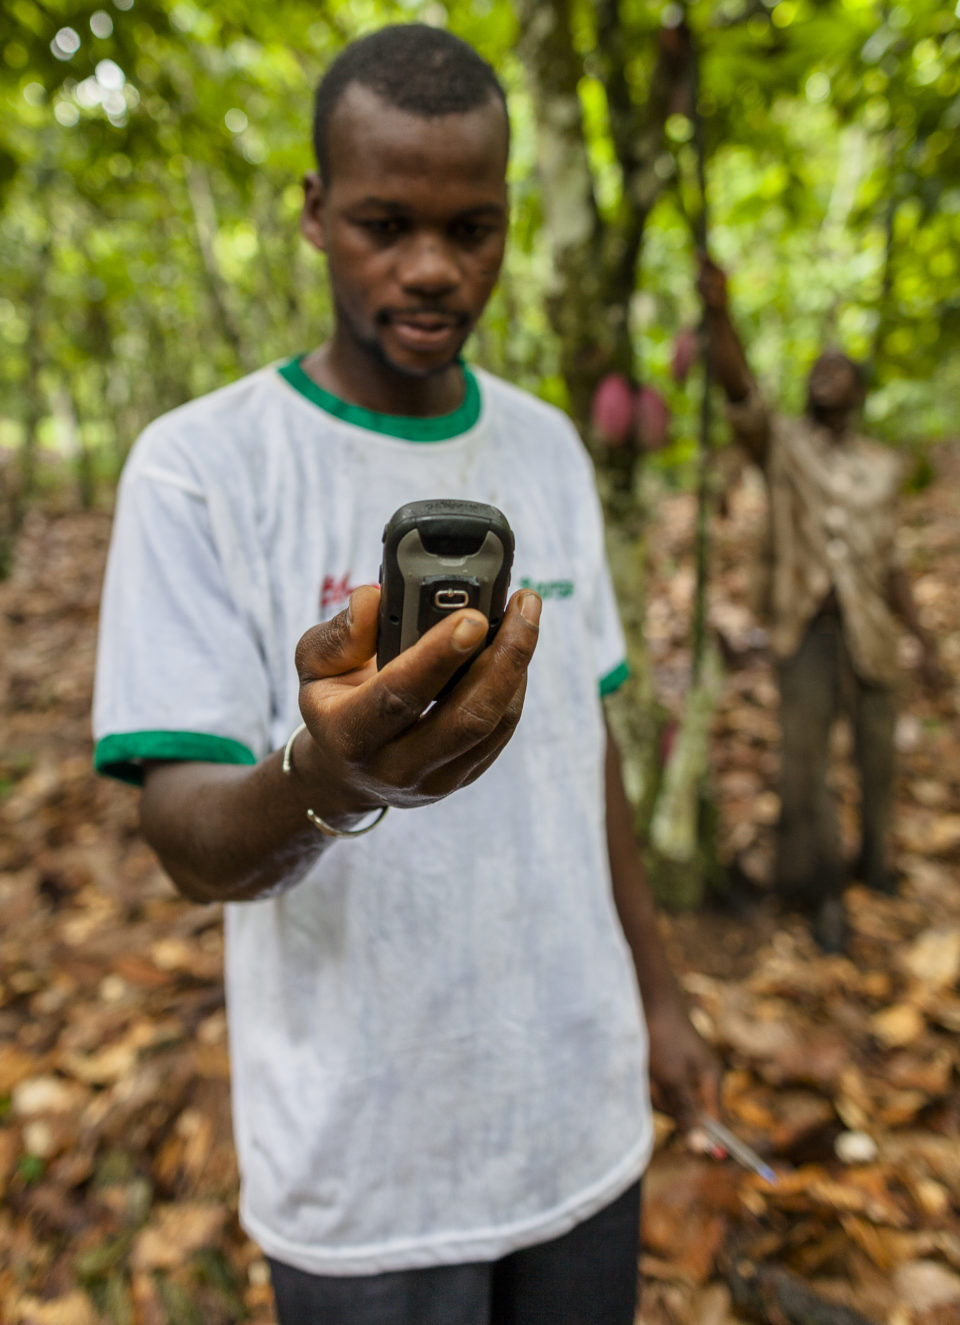 A man standing in a forest looking at an electronic device